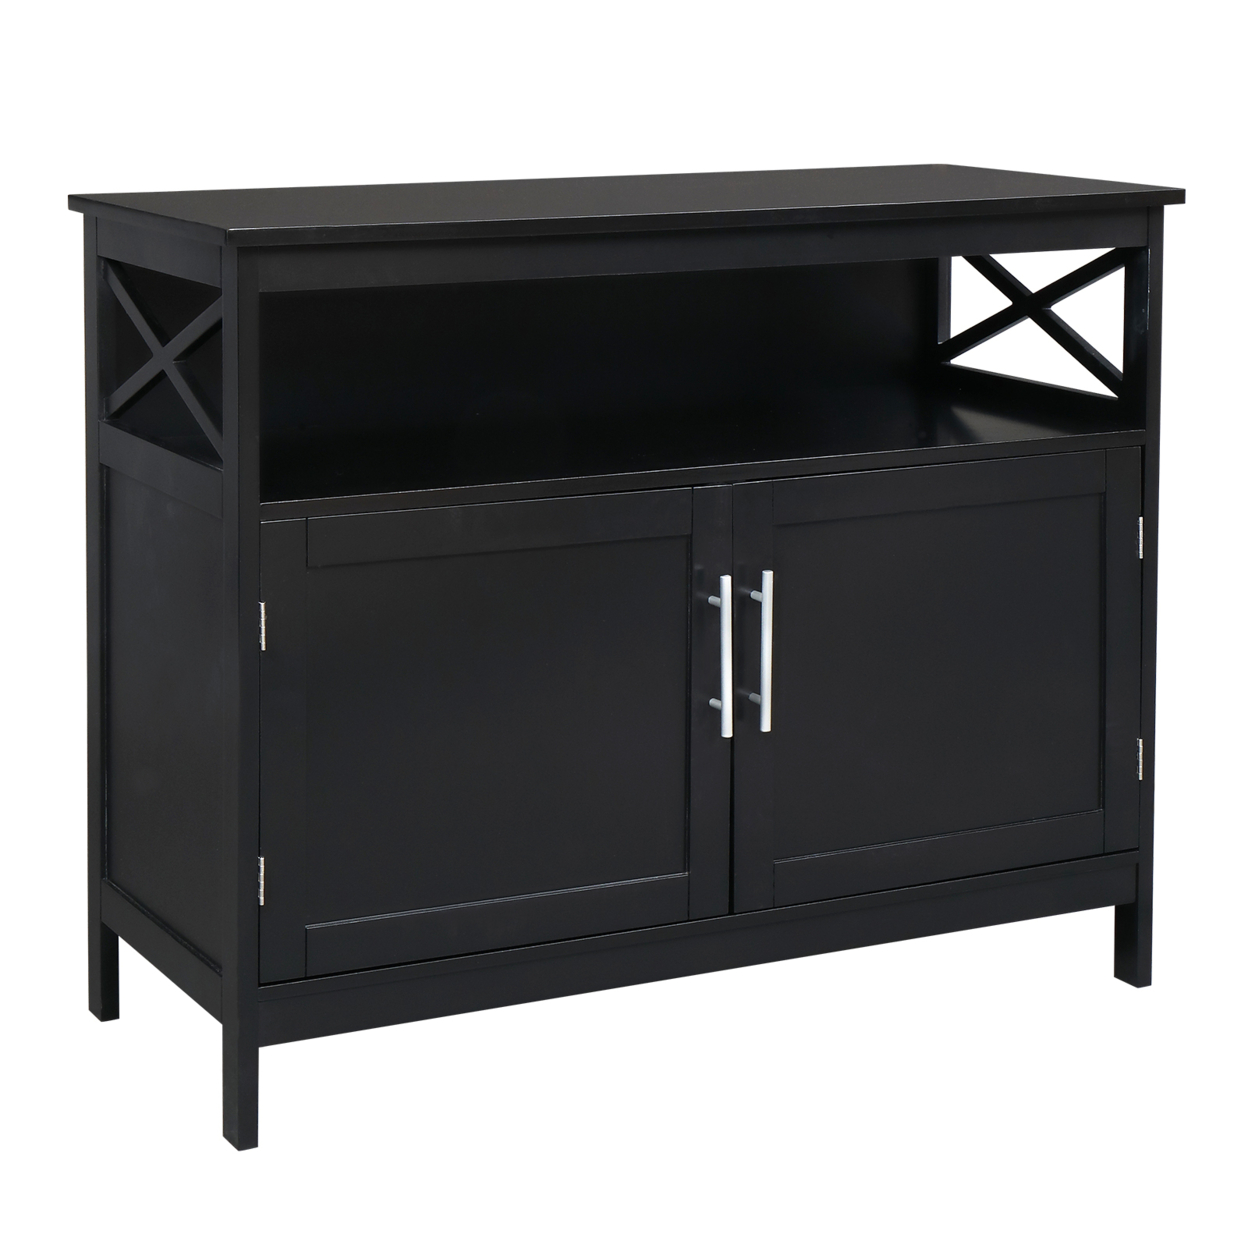 Density Board Double Door With Partition Side X-Shaped Sideboard Black